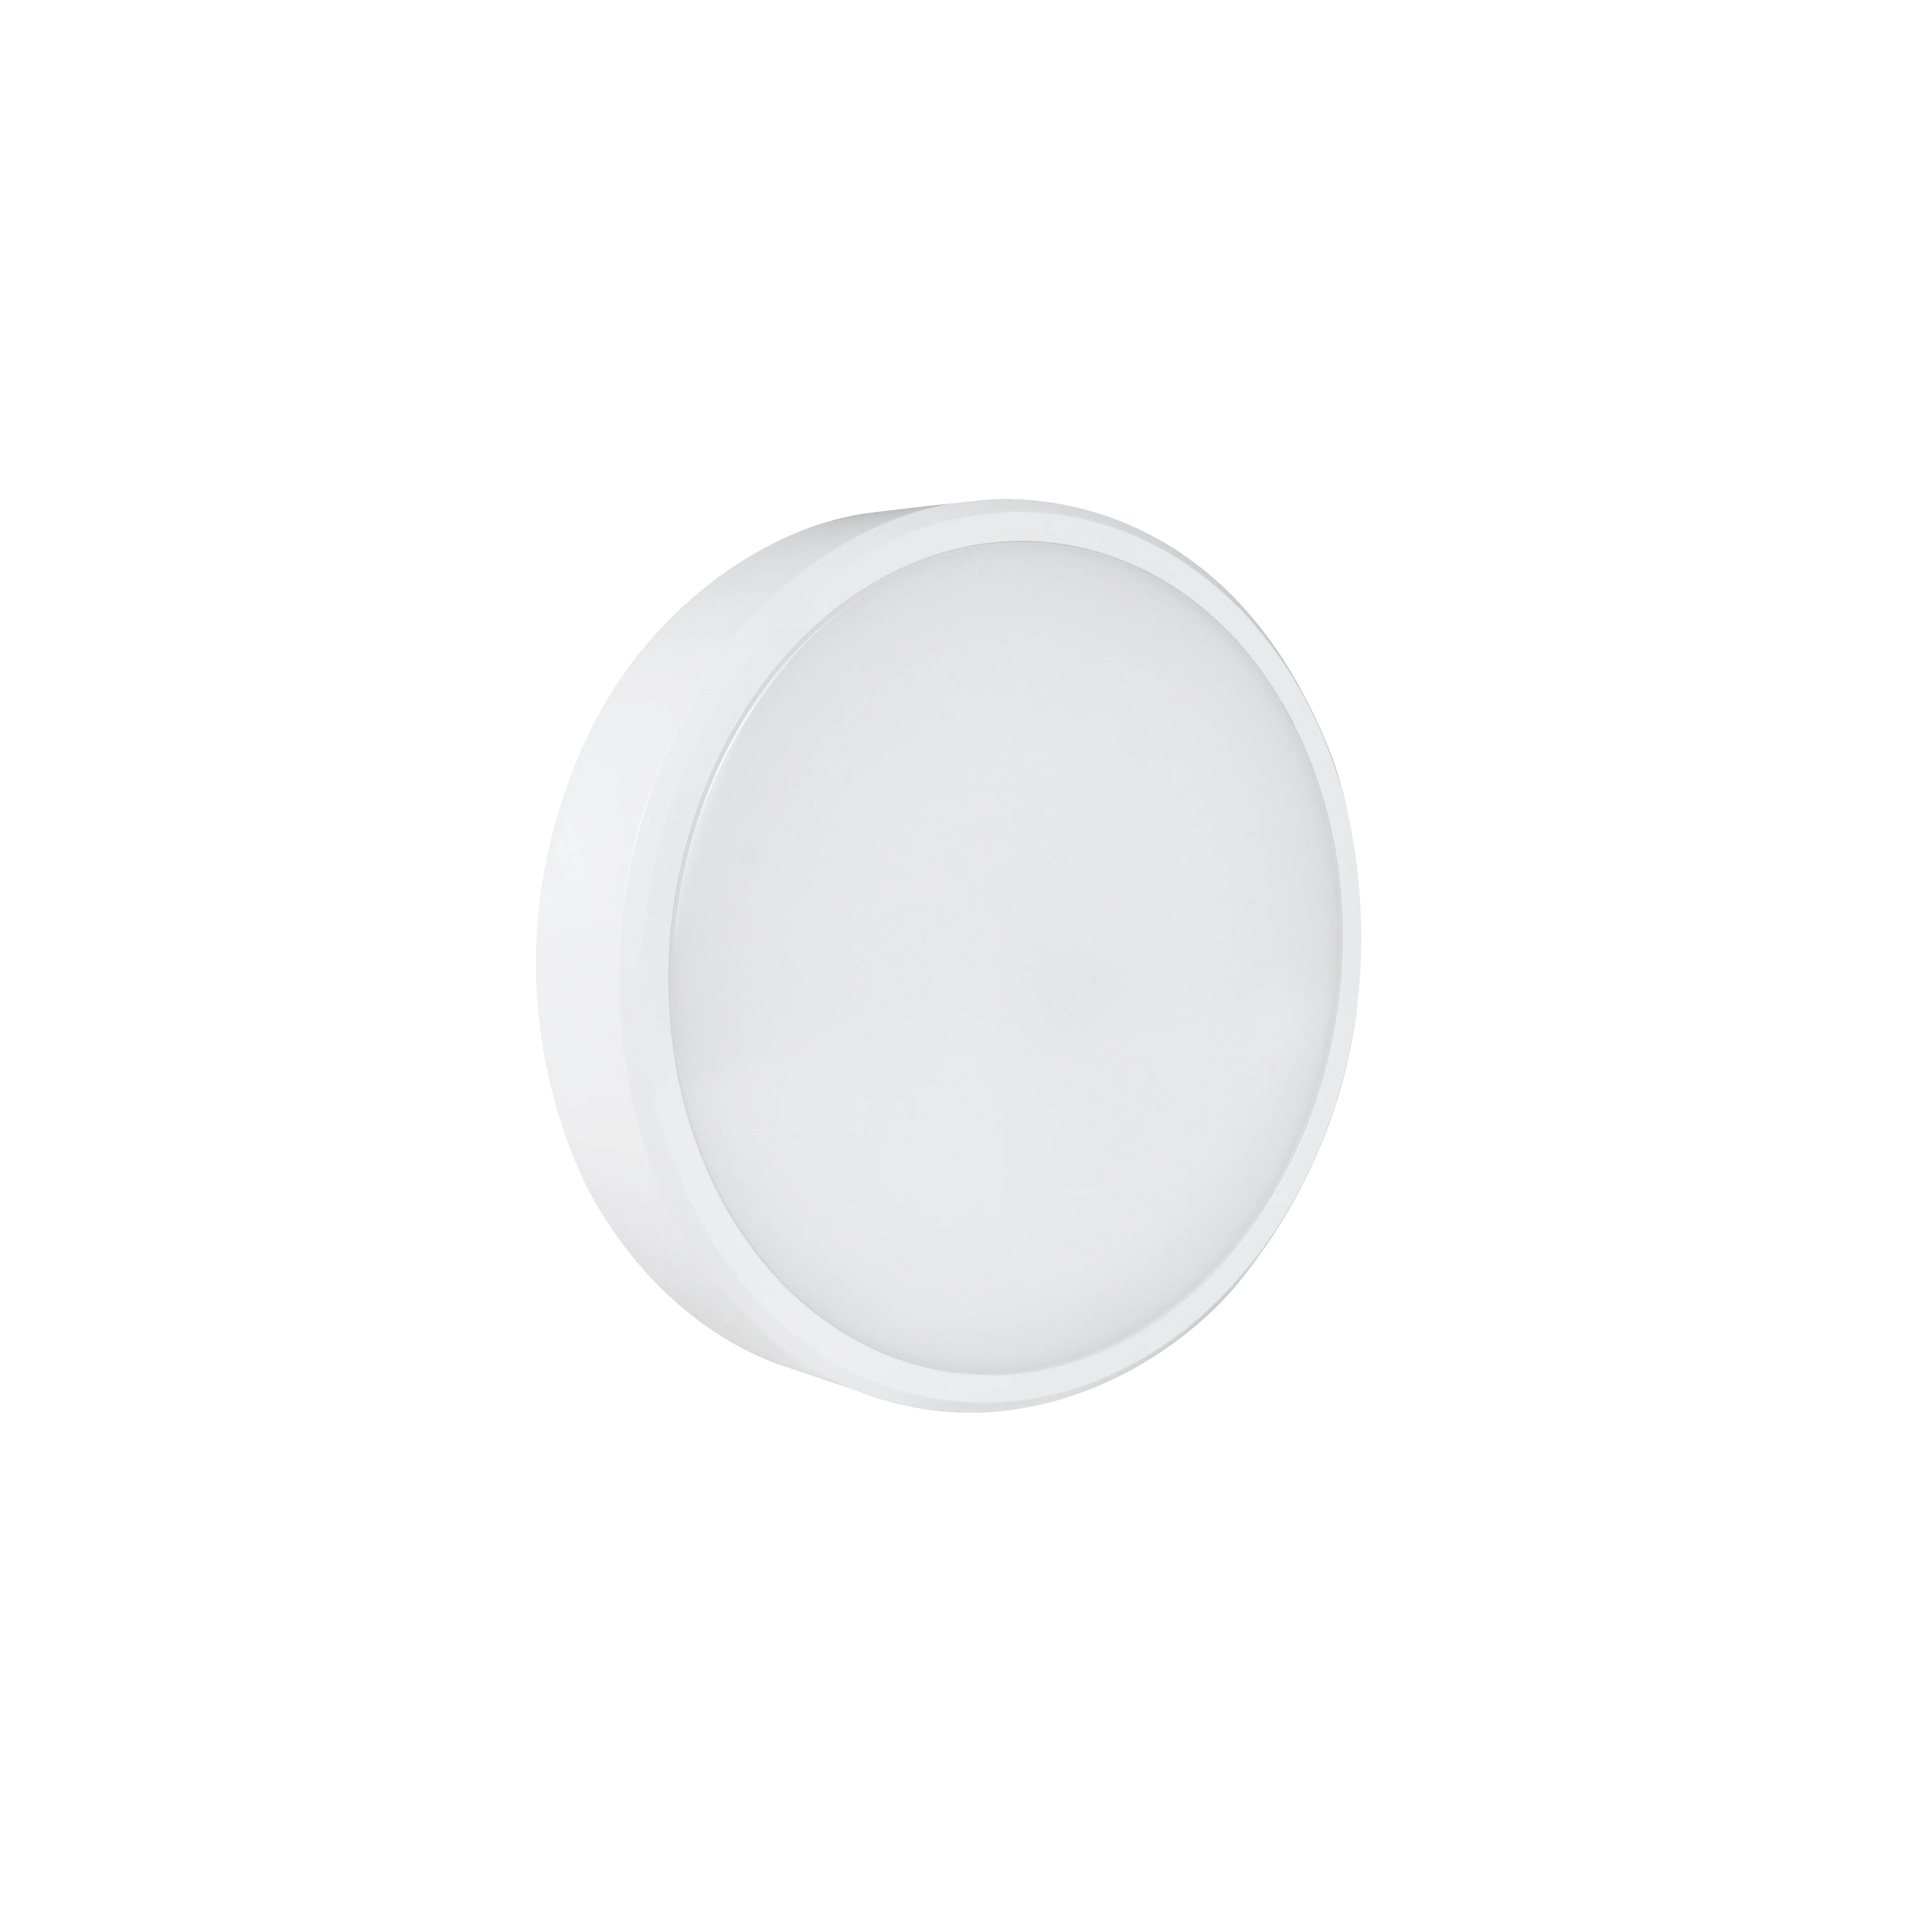 Indoor ip66 waterproof ceiling light CCT switchable round shape Europe popular CE CB 15w 21w with sensor